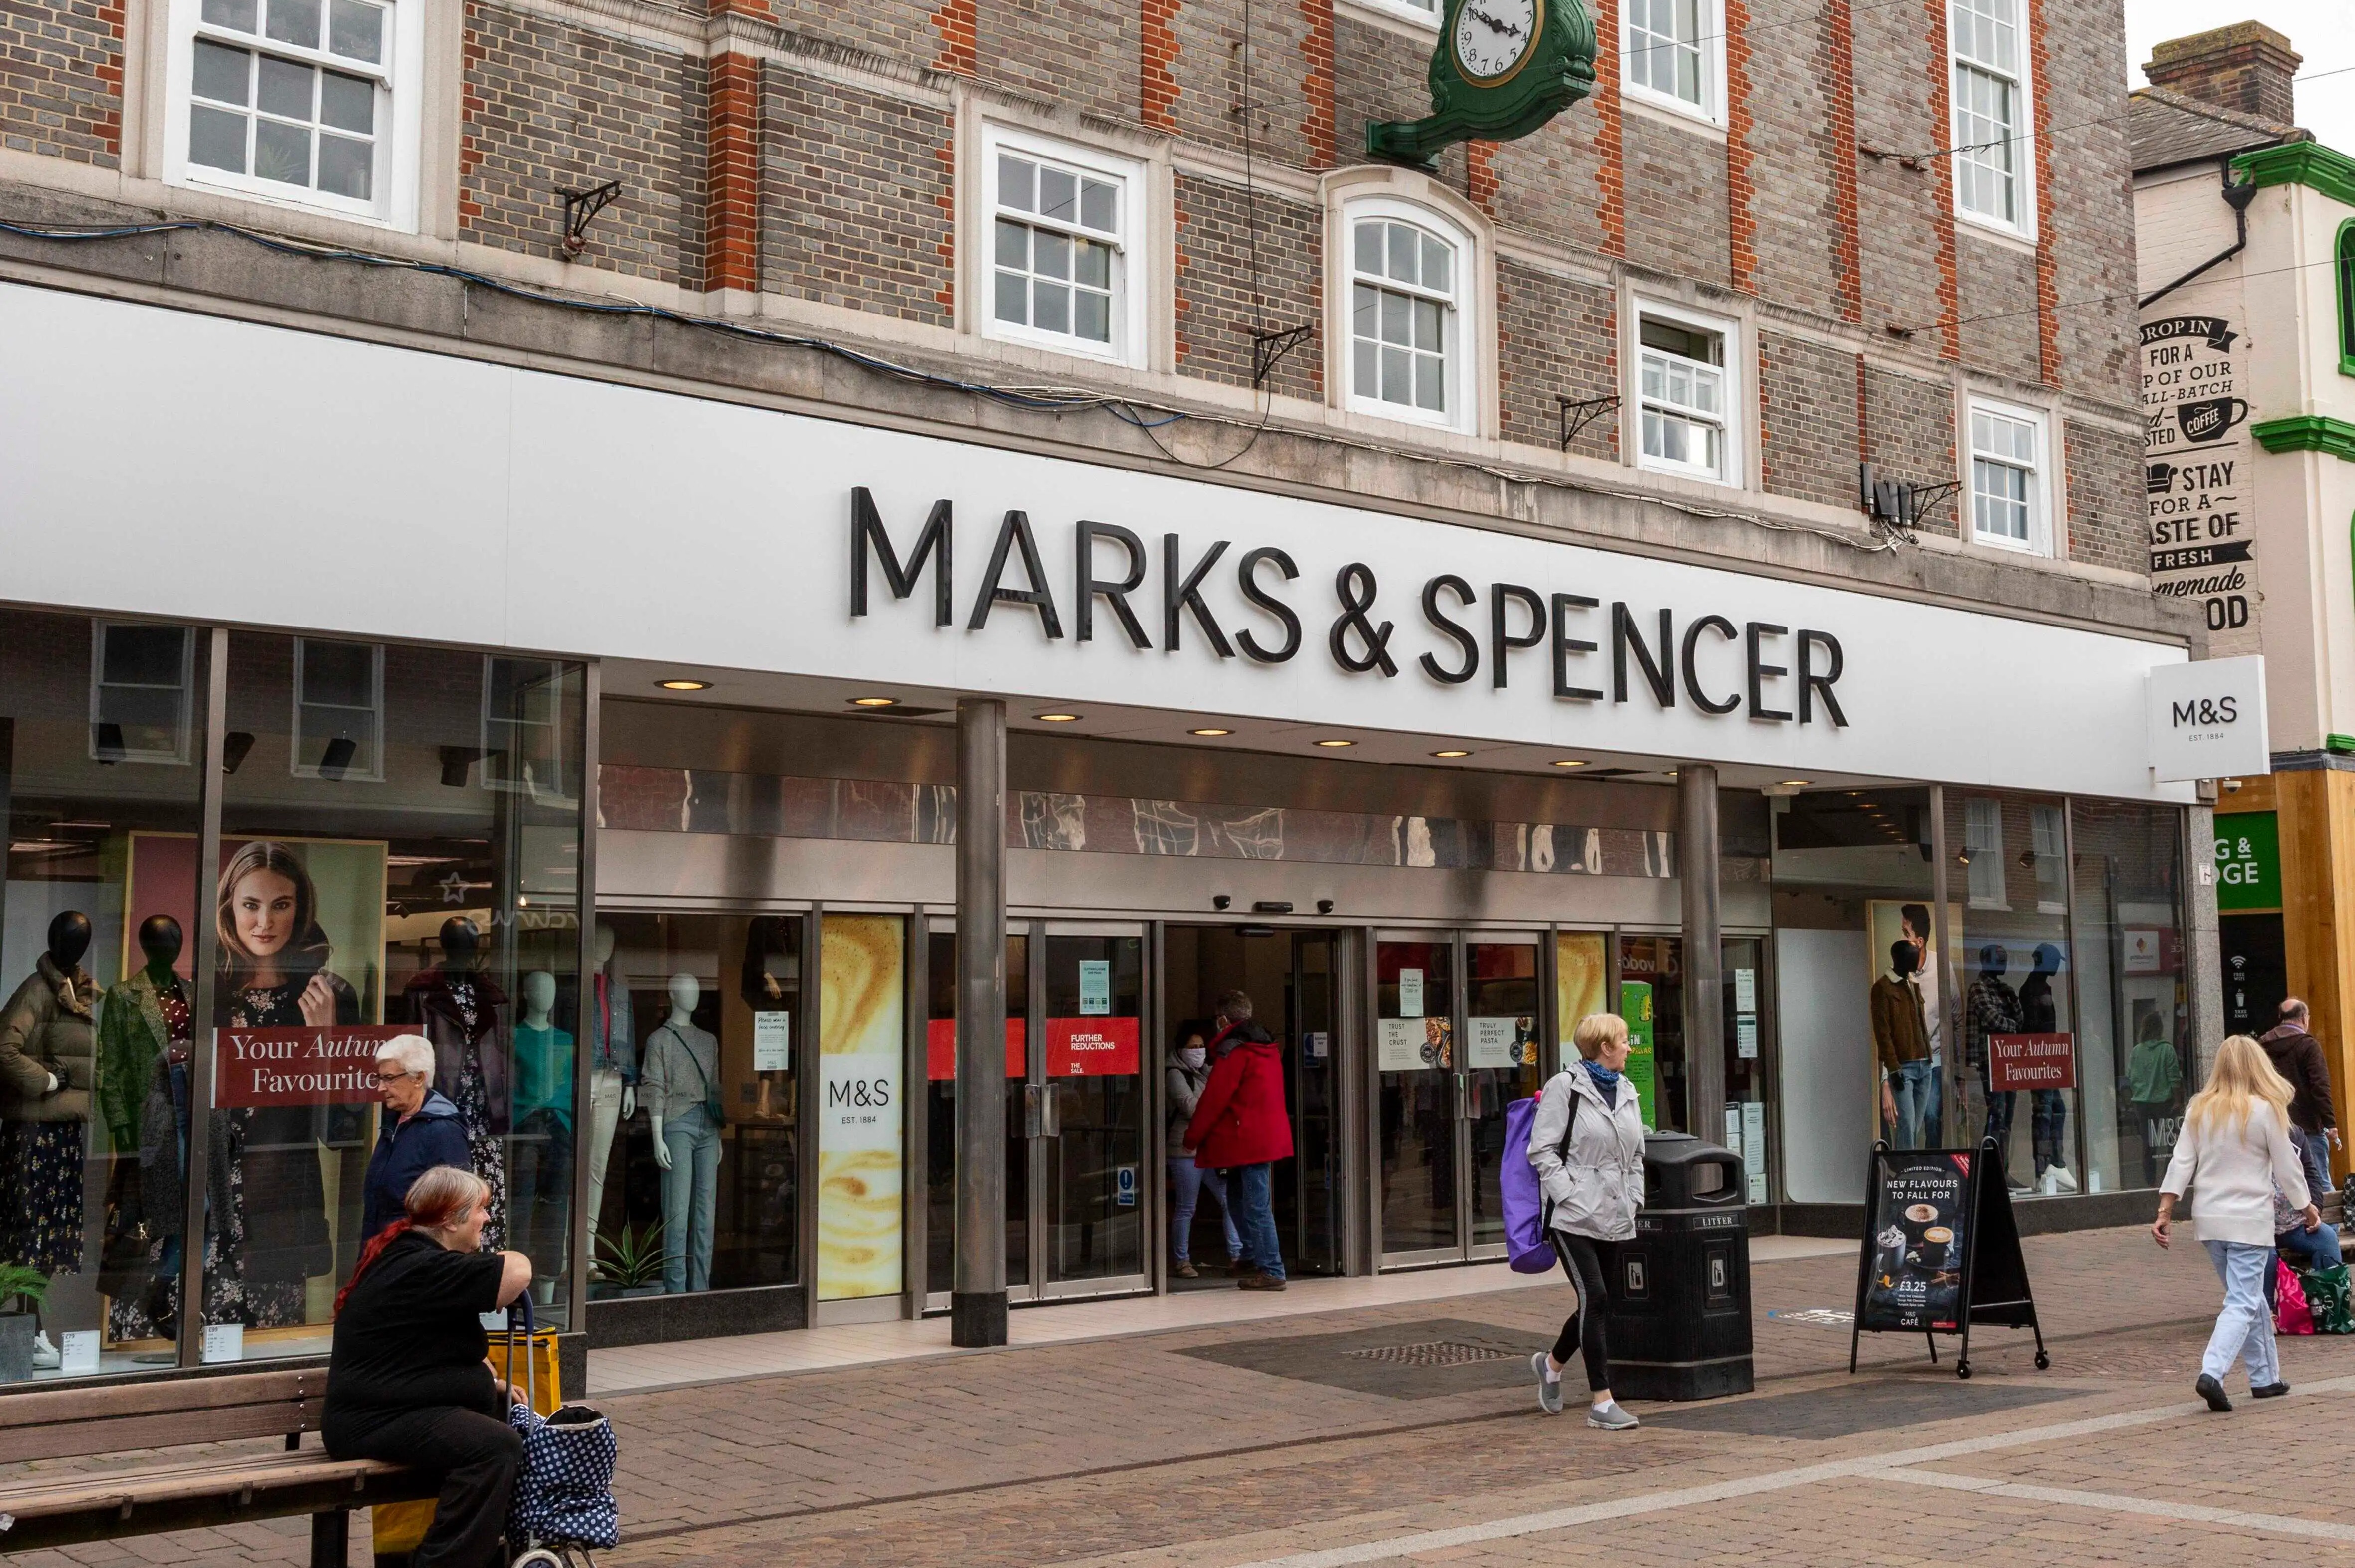 The retail giant plans to pull out 67 stores from the UK high streets and malls